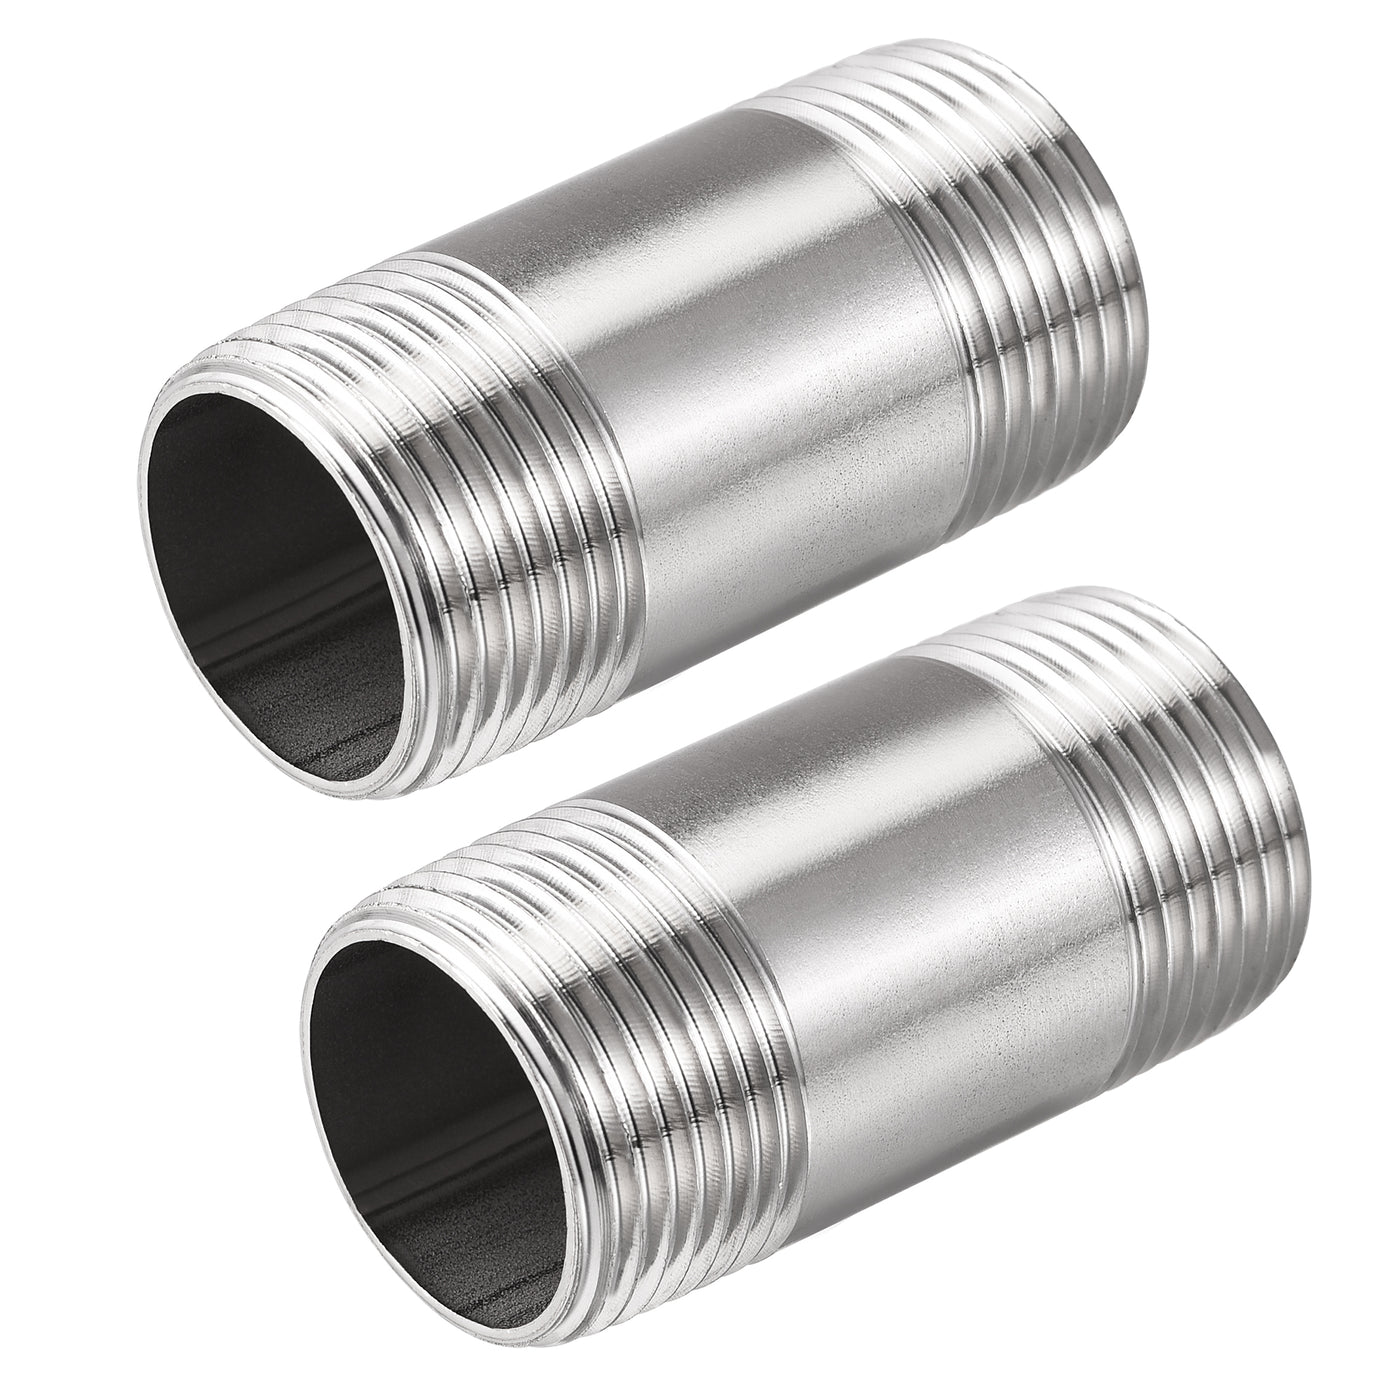 Uxcell Uxcell Stainless Steel Pipe Fitting G3/4 Male Thread 80mm Length Coupler for Extending Pipes, Pack of 2